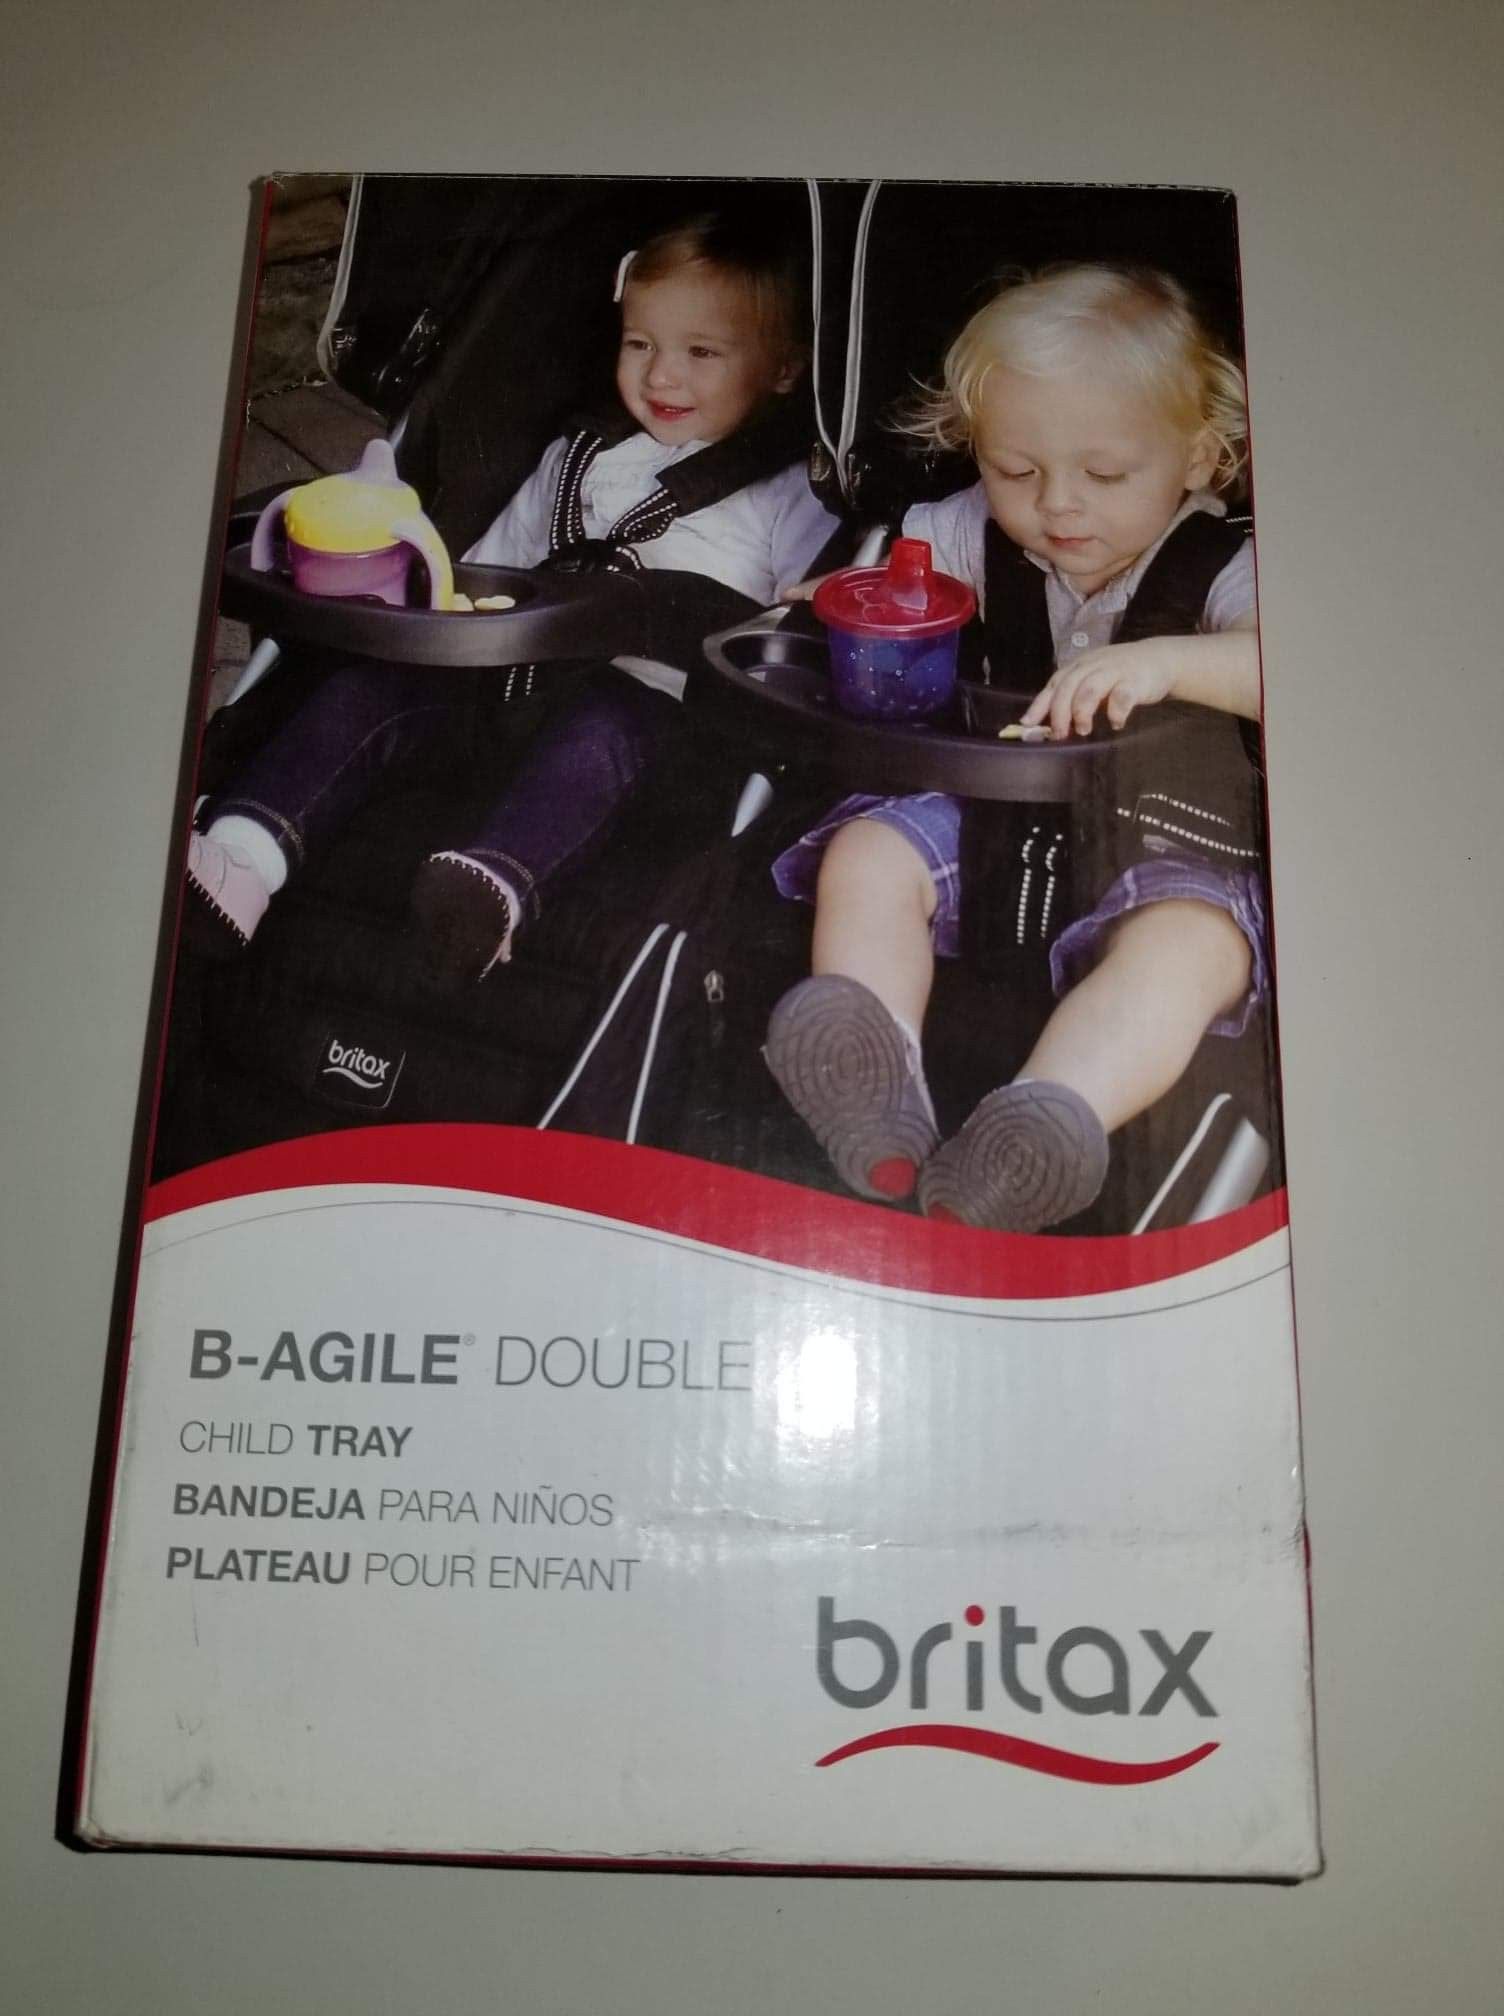 Britax child tray missing one tray